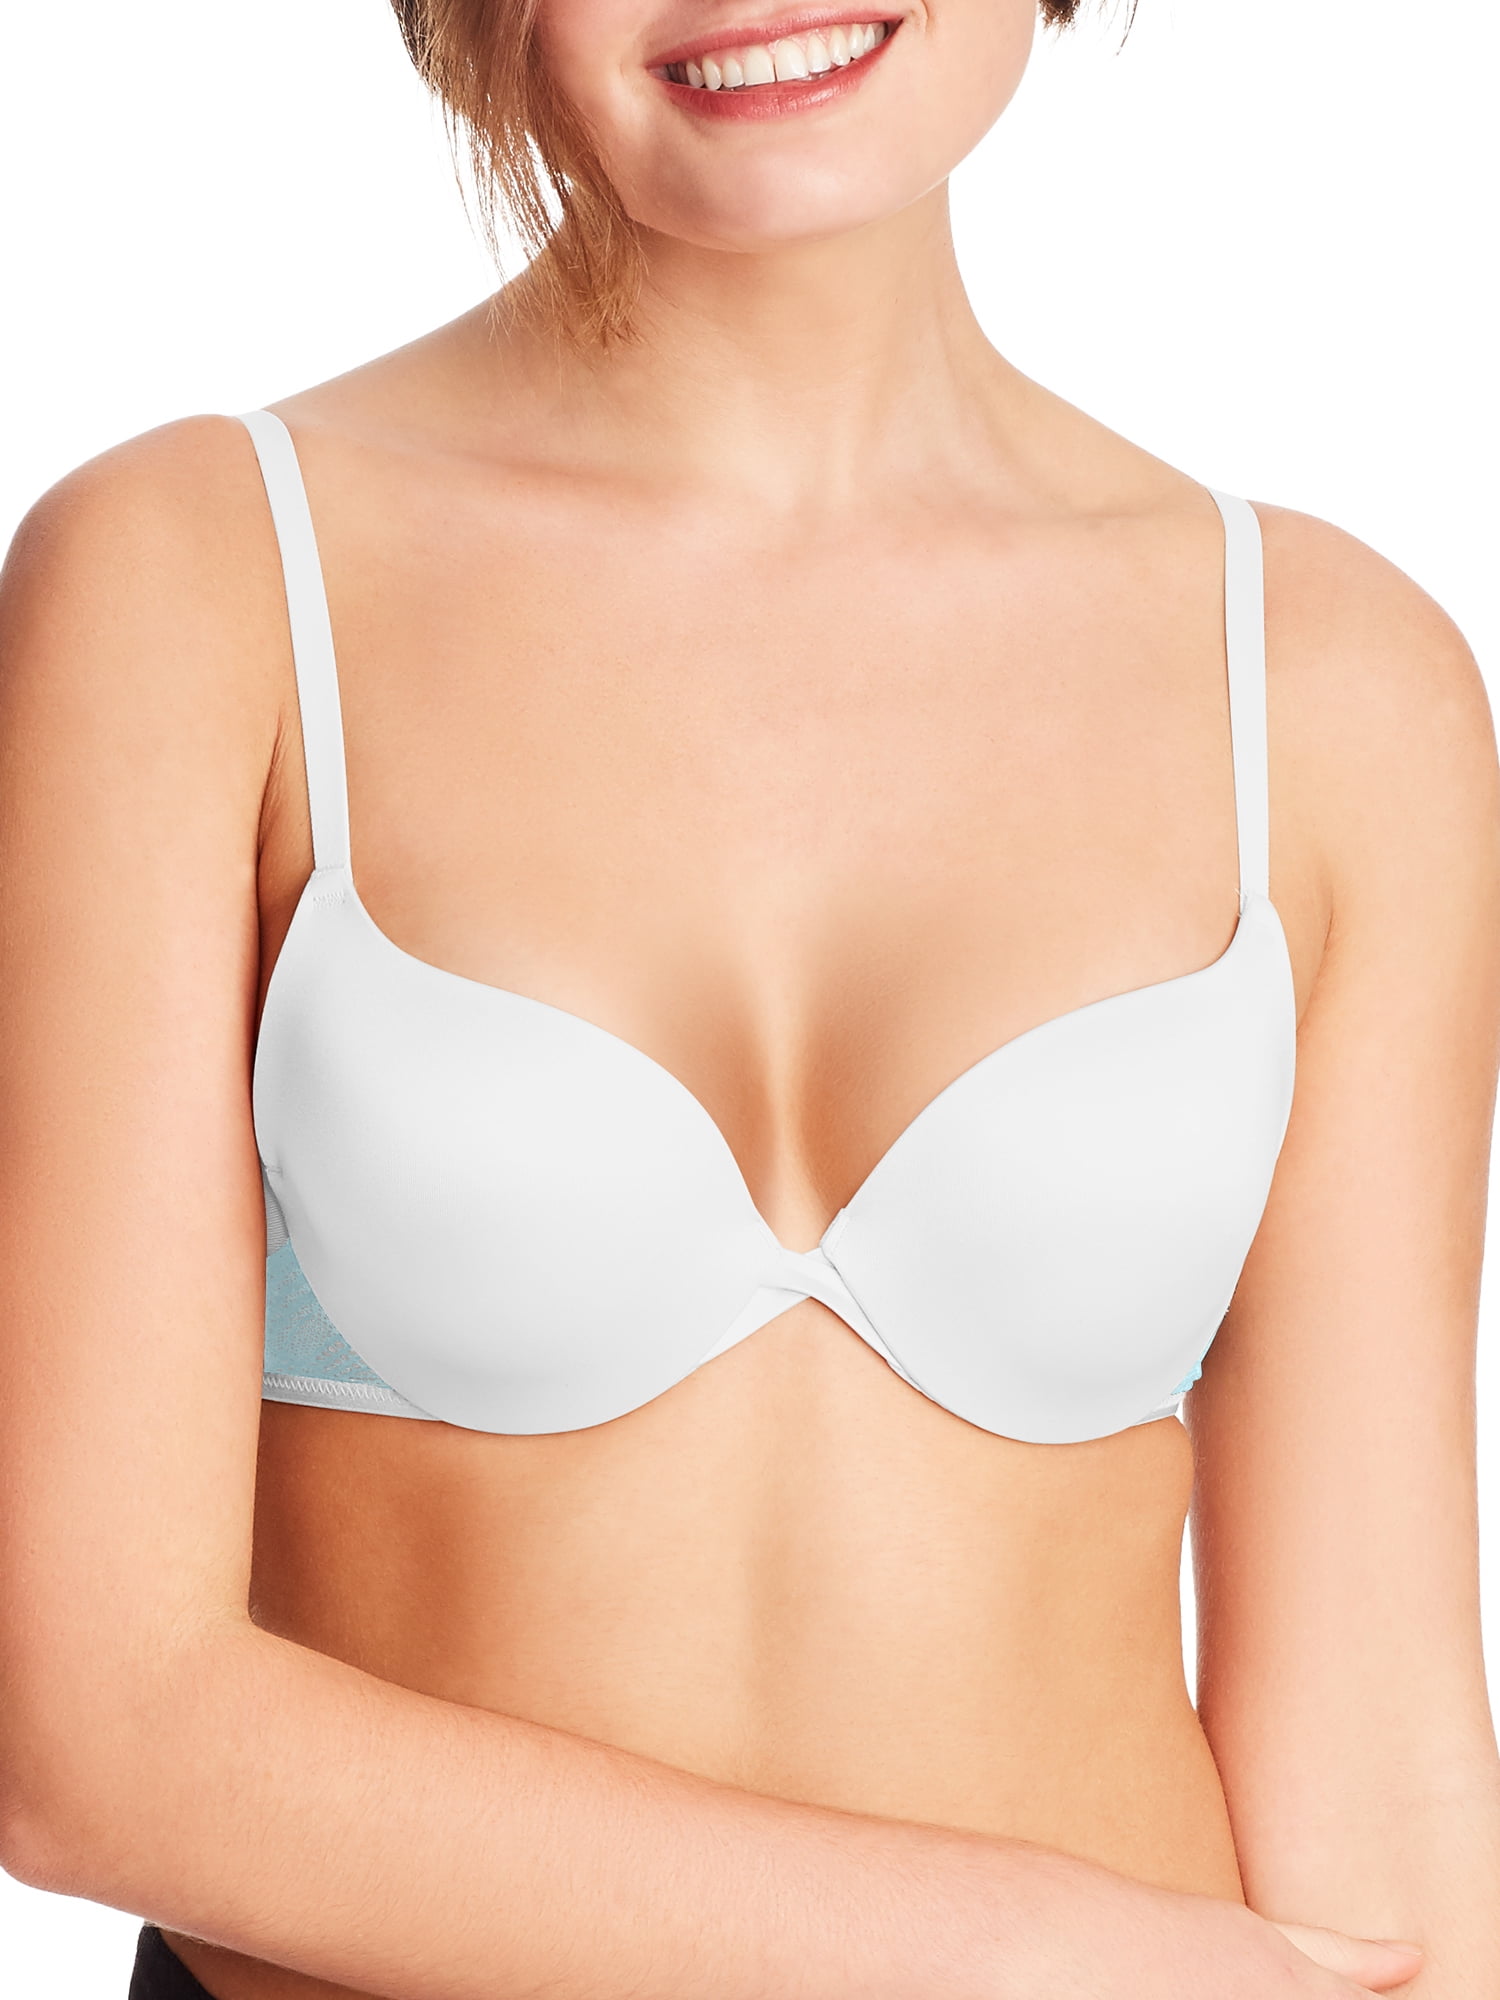 Maidenform Women's Love the Lift Push Up and In Underwire Bra